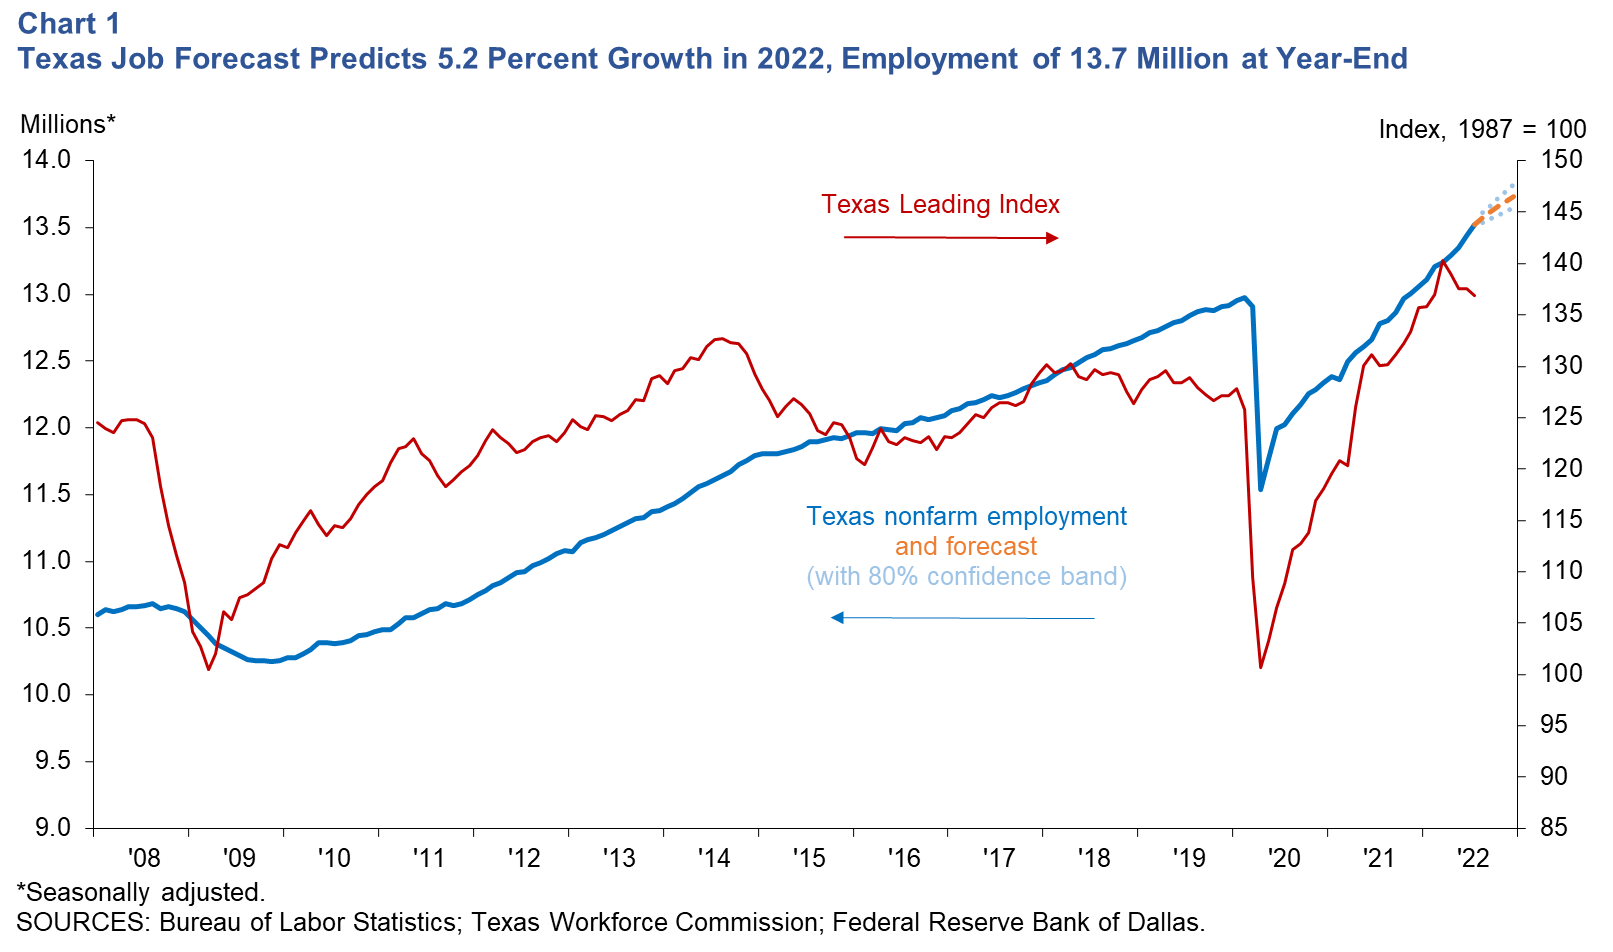 Texas Job Forecast Predicts 5.2 Percent Growth in 2022, Employment to End the Year at 13.7 Million